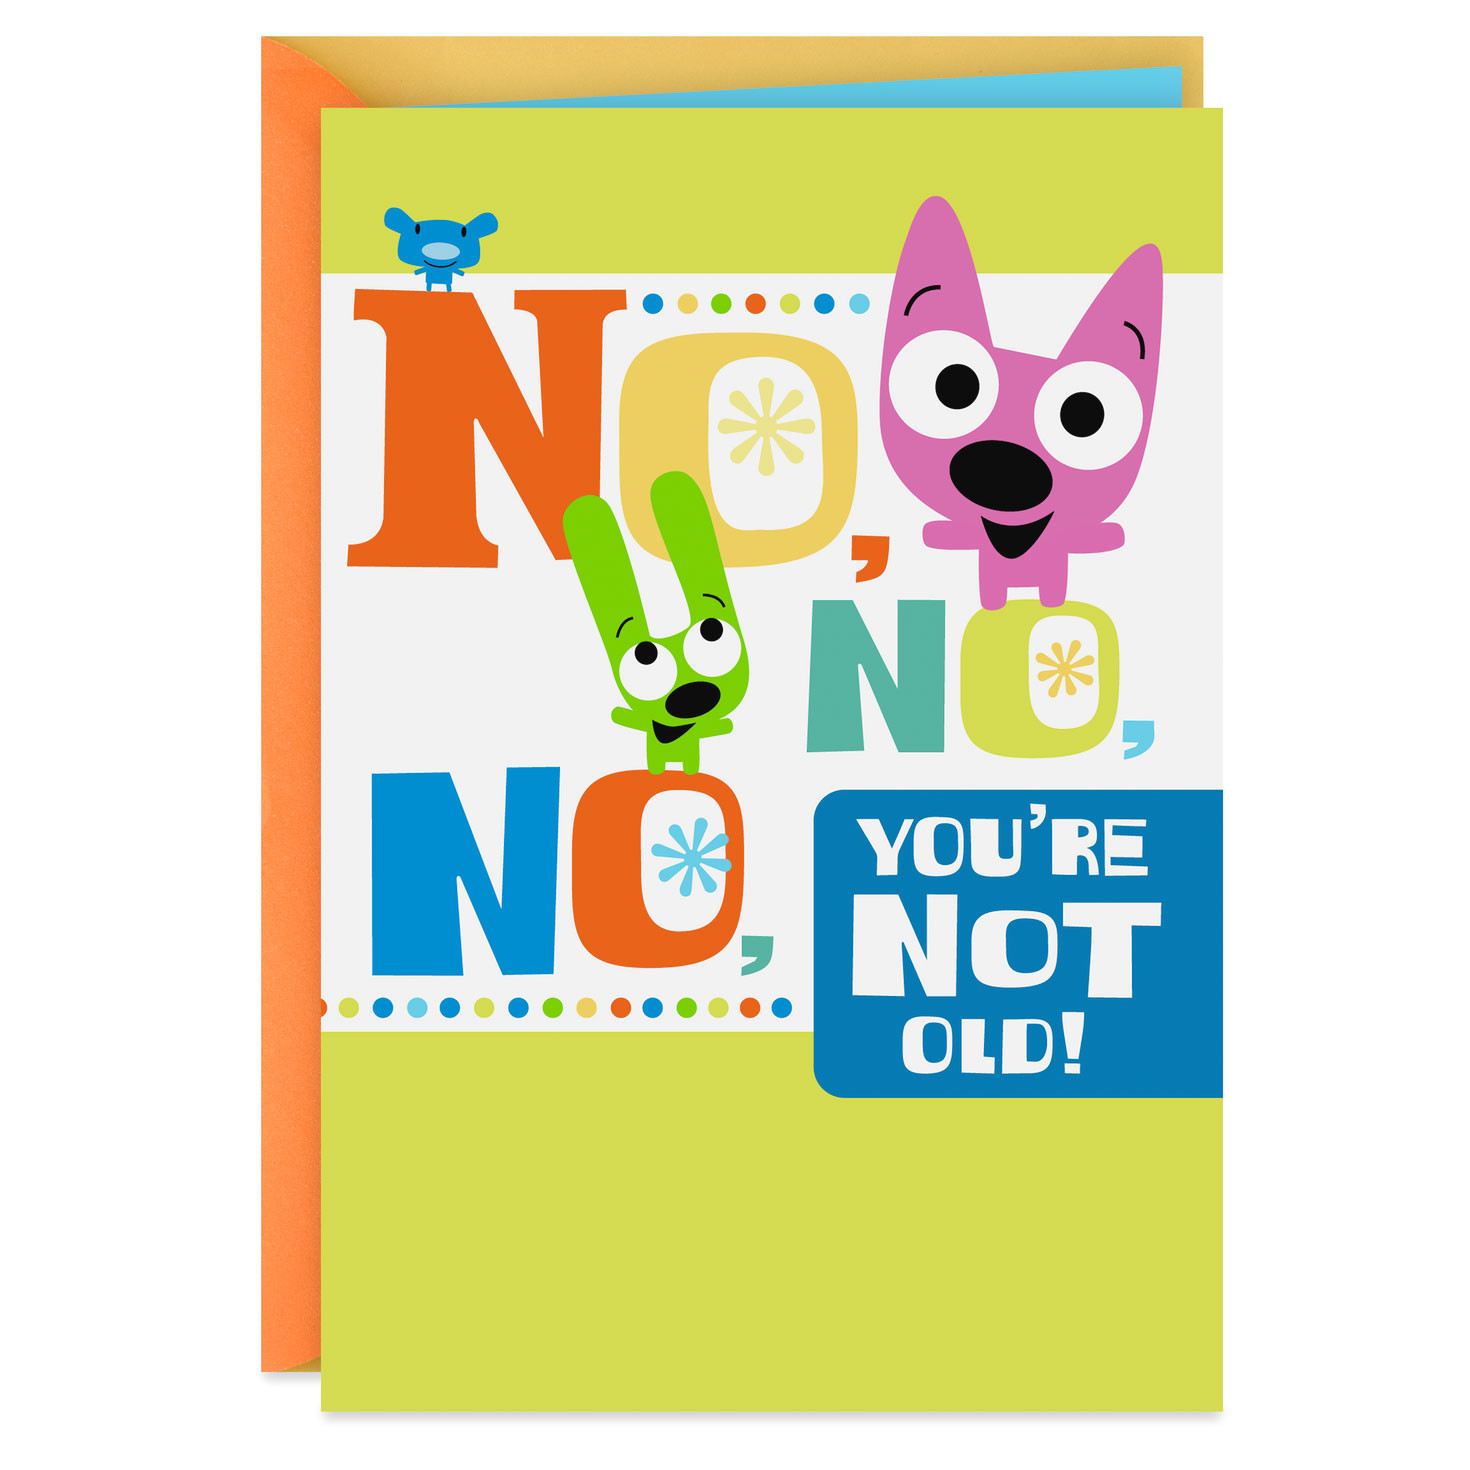 Hoops And Yoyo Birthday Cards
 hoops&yoyo™ You re Not Old Birthday Card With Sound